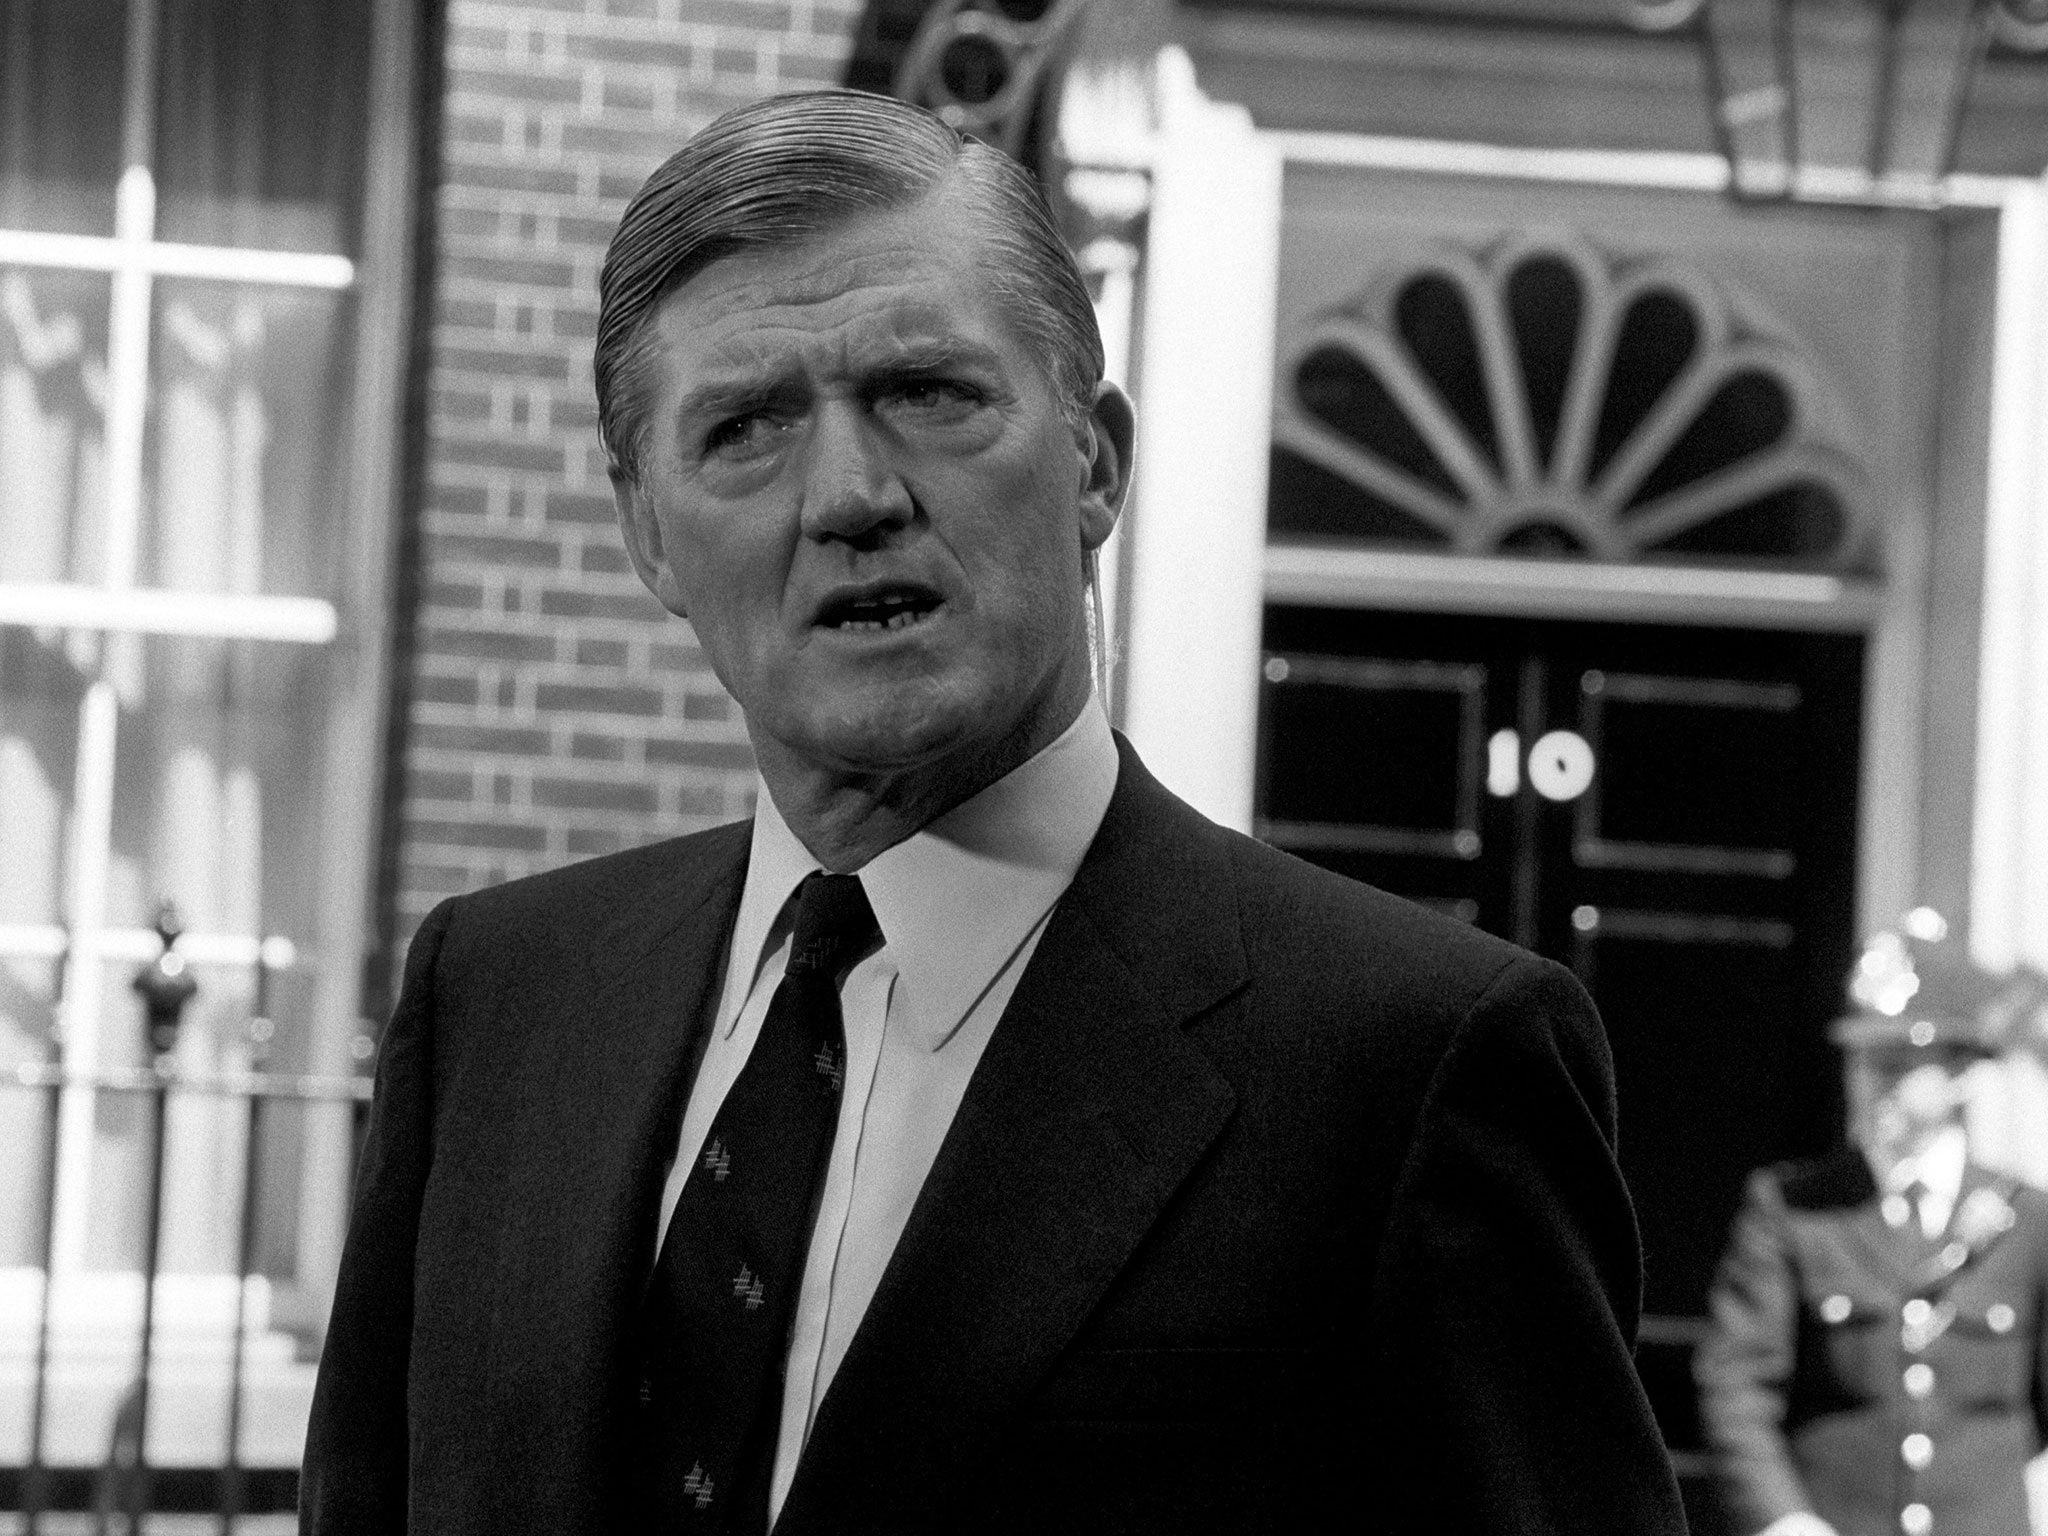 File photo from July 1988 of the then-Energy Secretary Cecil Parkinson who has died, his family announced